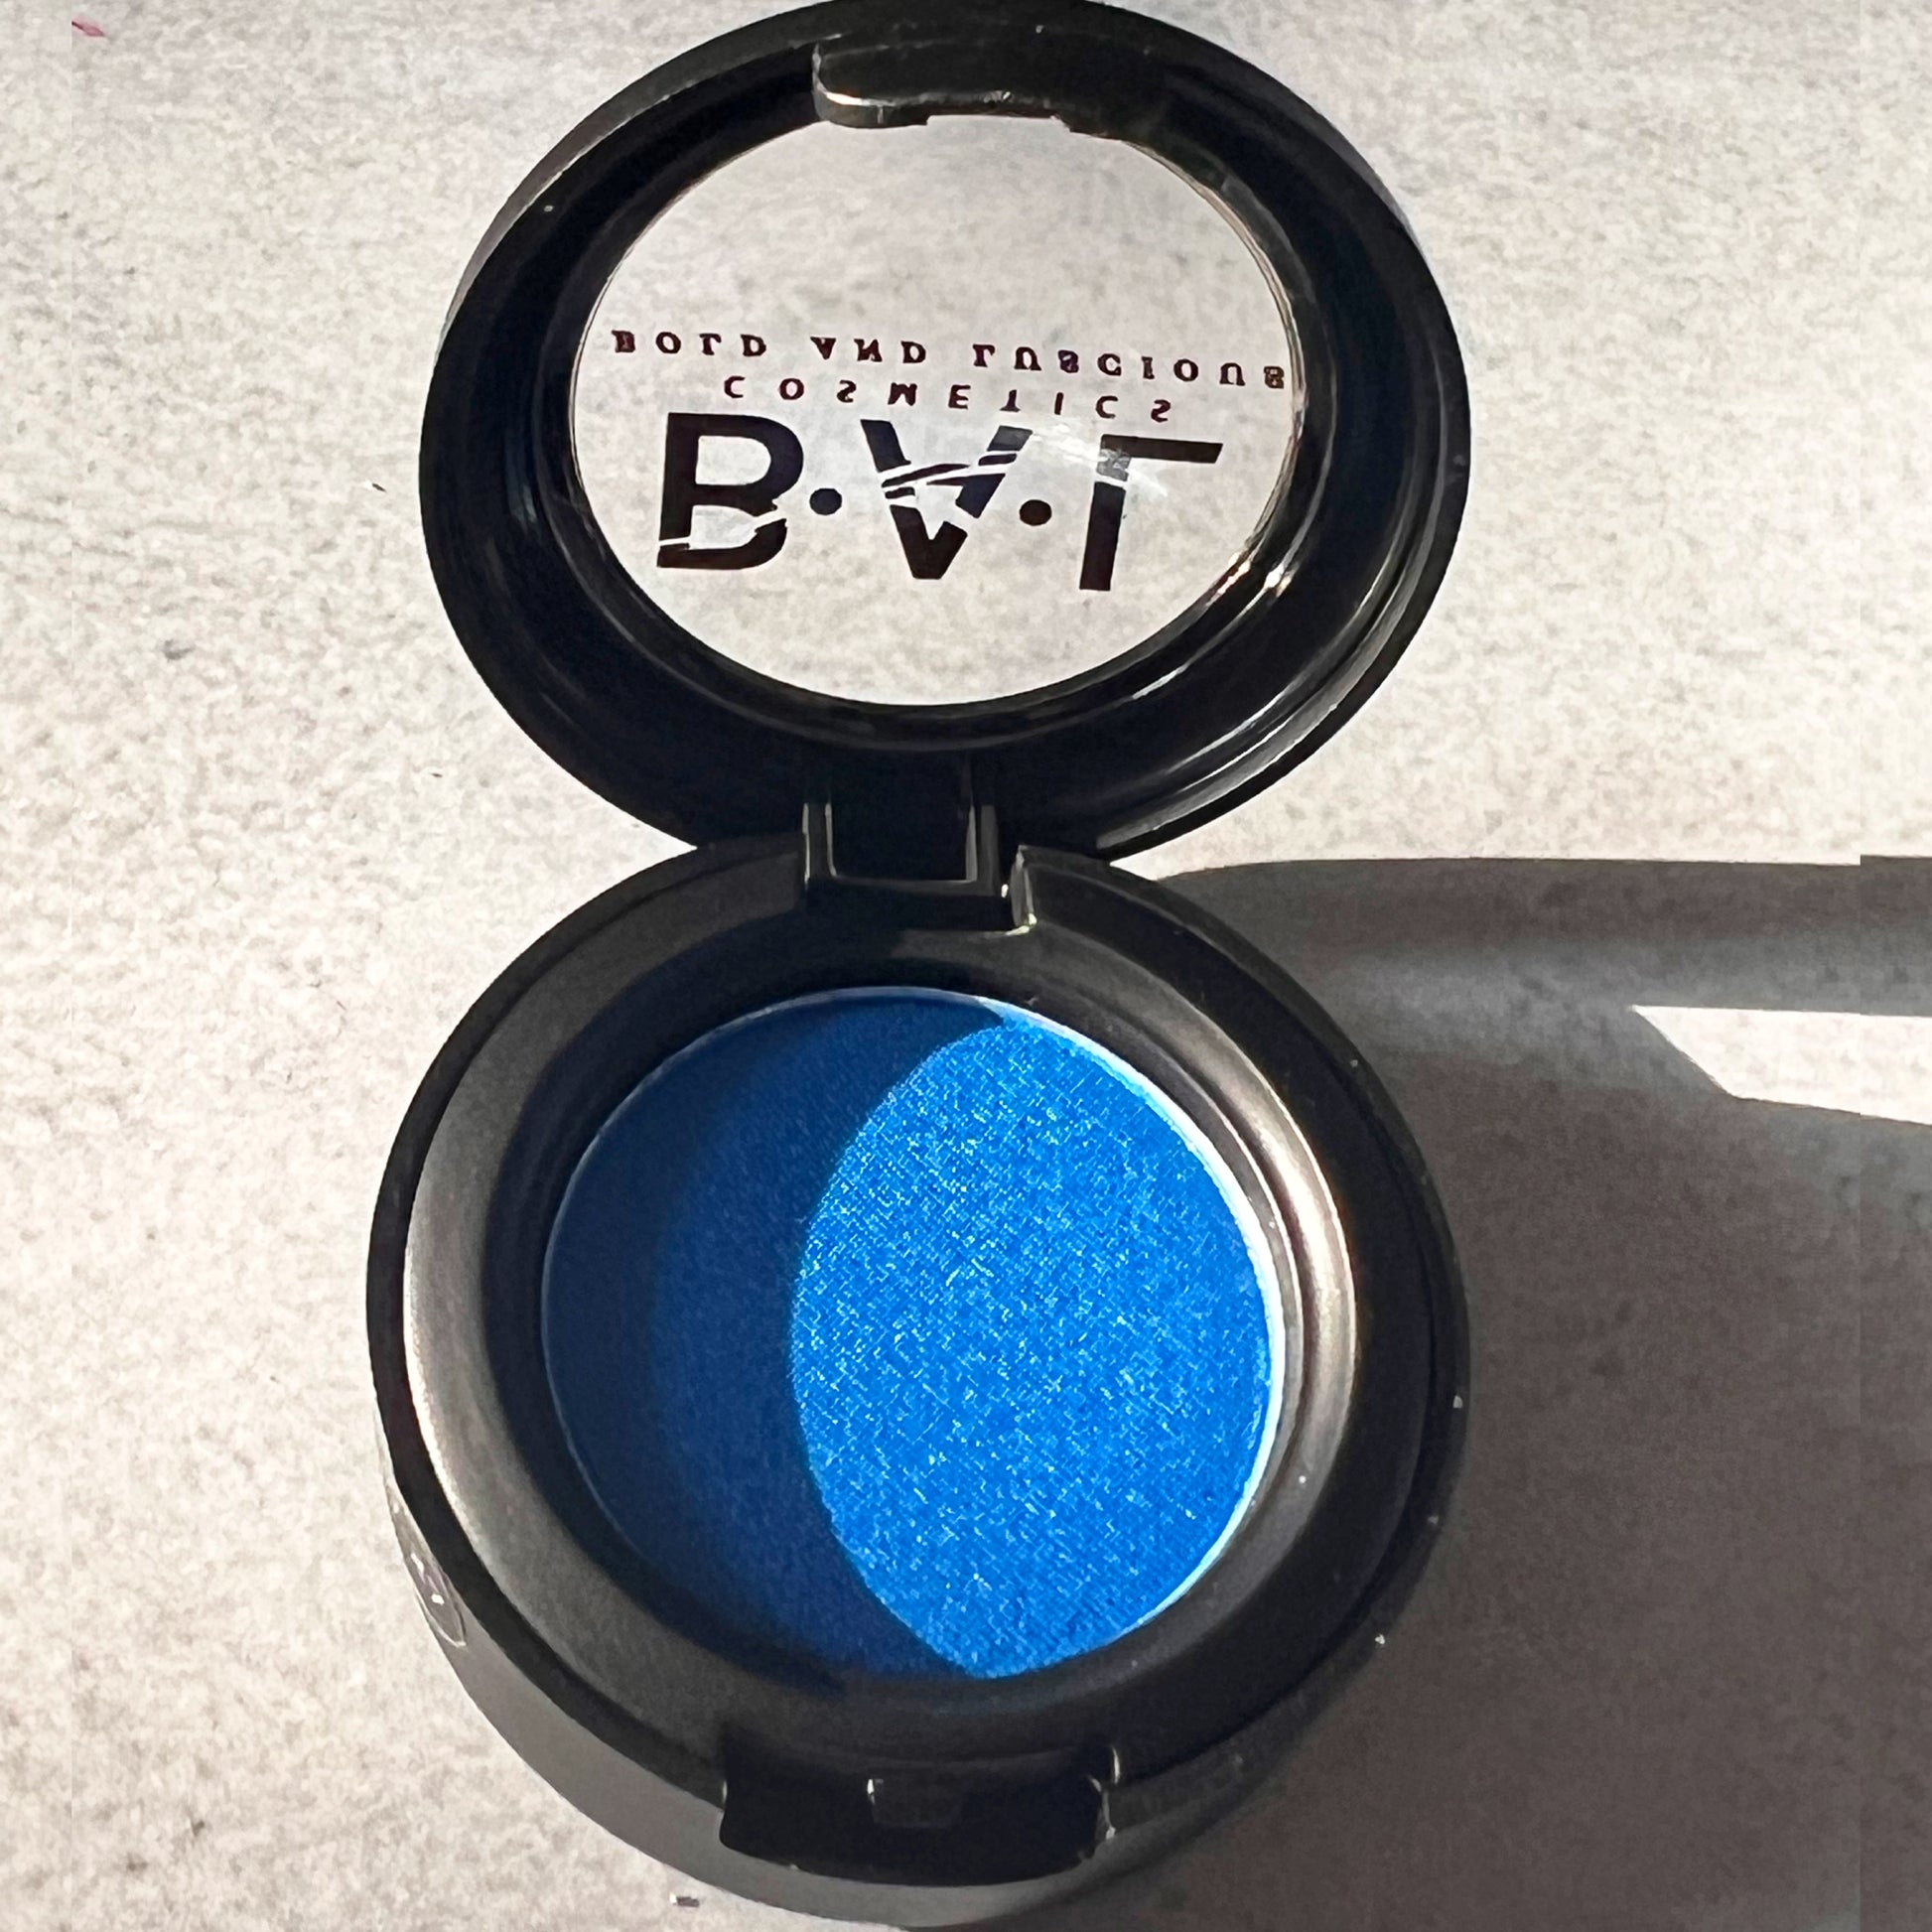 A deep rich blue color that is shimmery and pigmented. the Bold and Luscious Logo is visible.